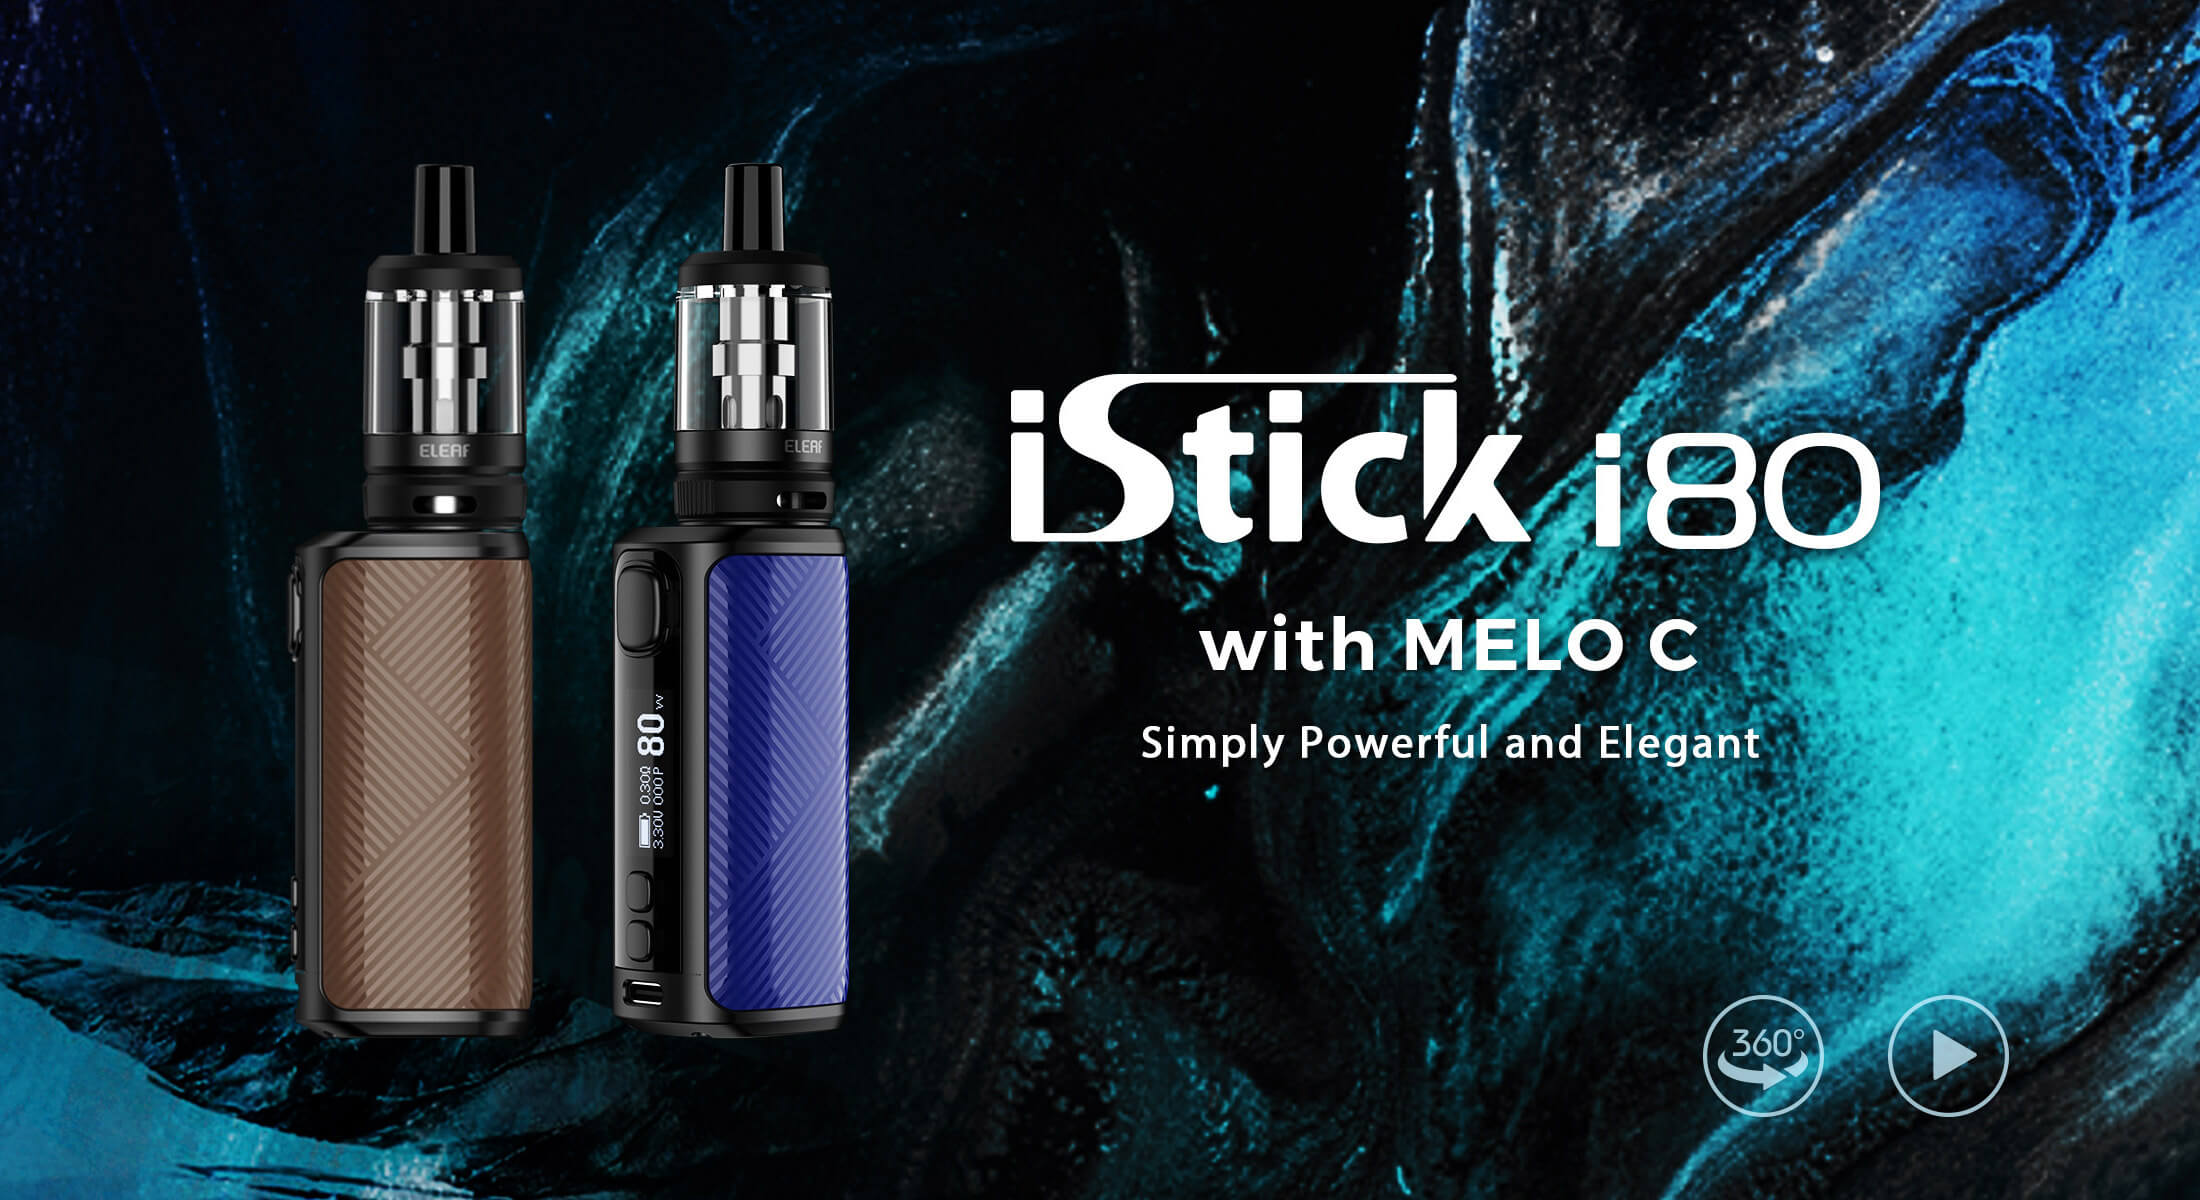  iStick i80 with MELO C